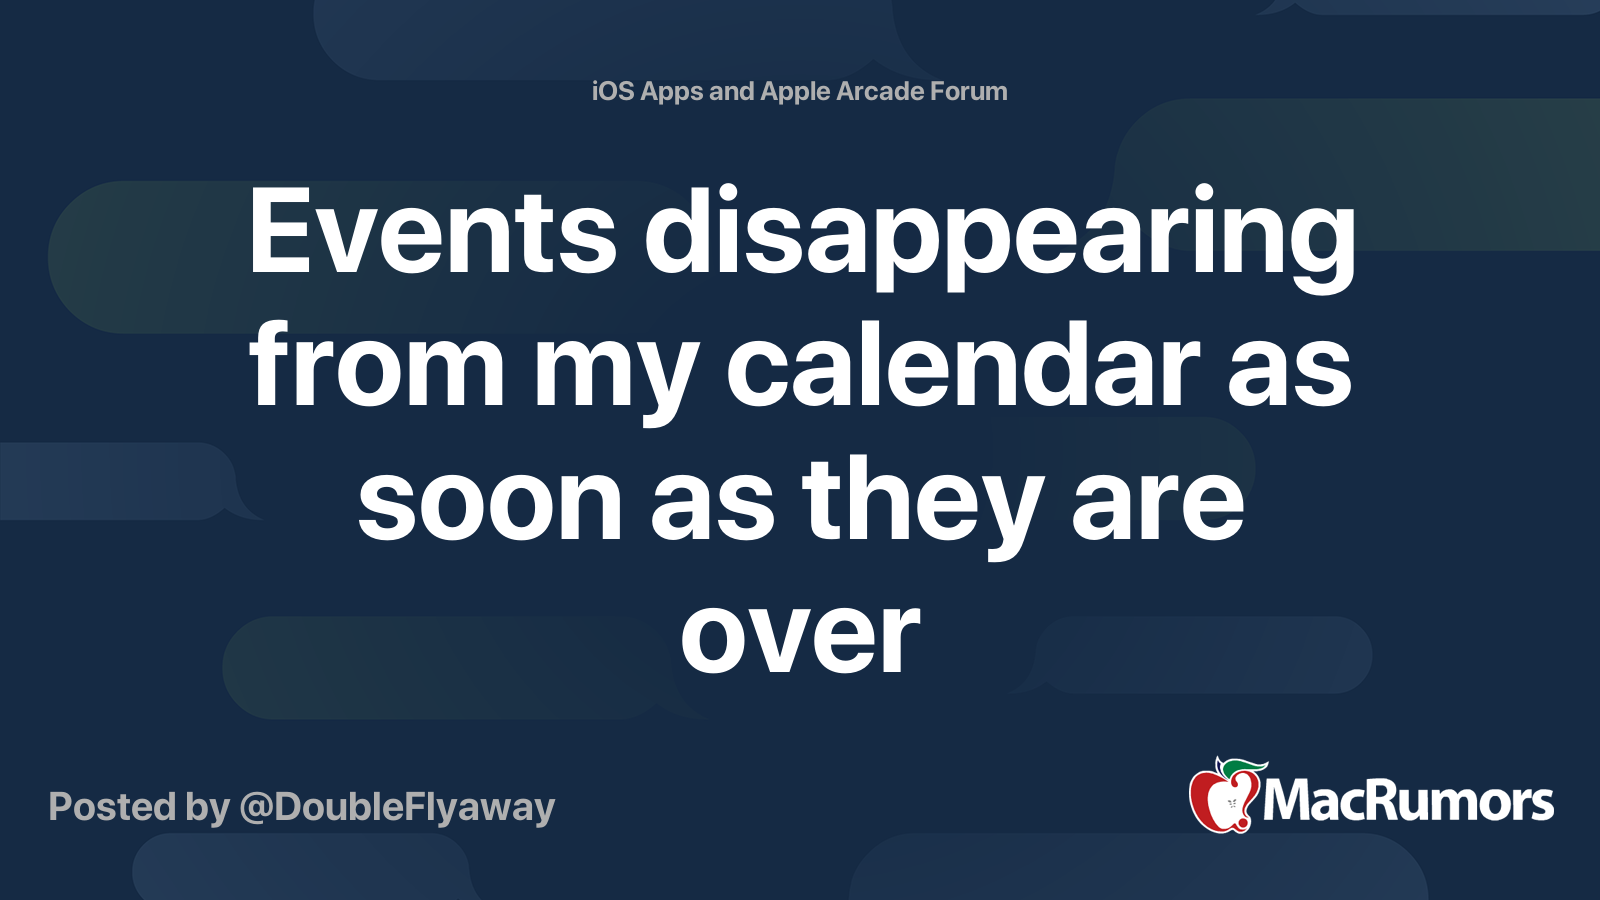 Events disappearing from my calendar as soon as they are over